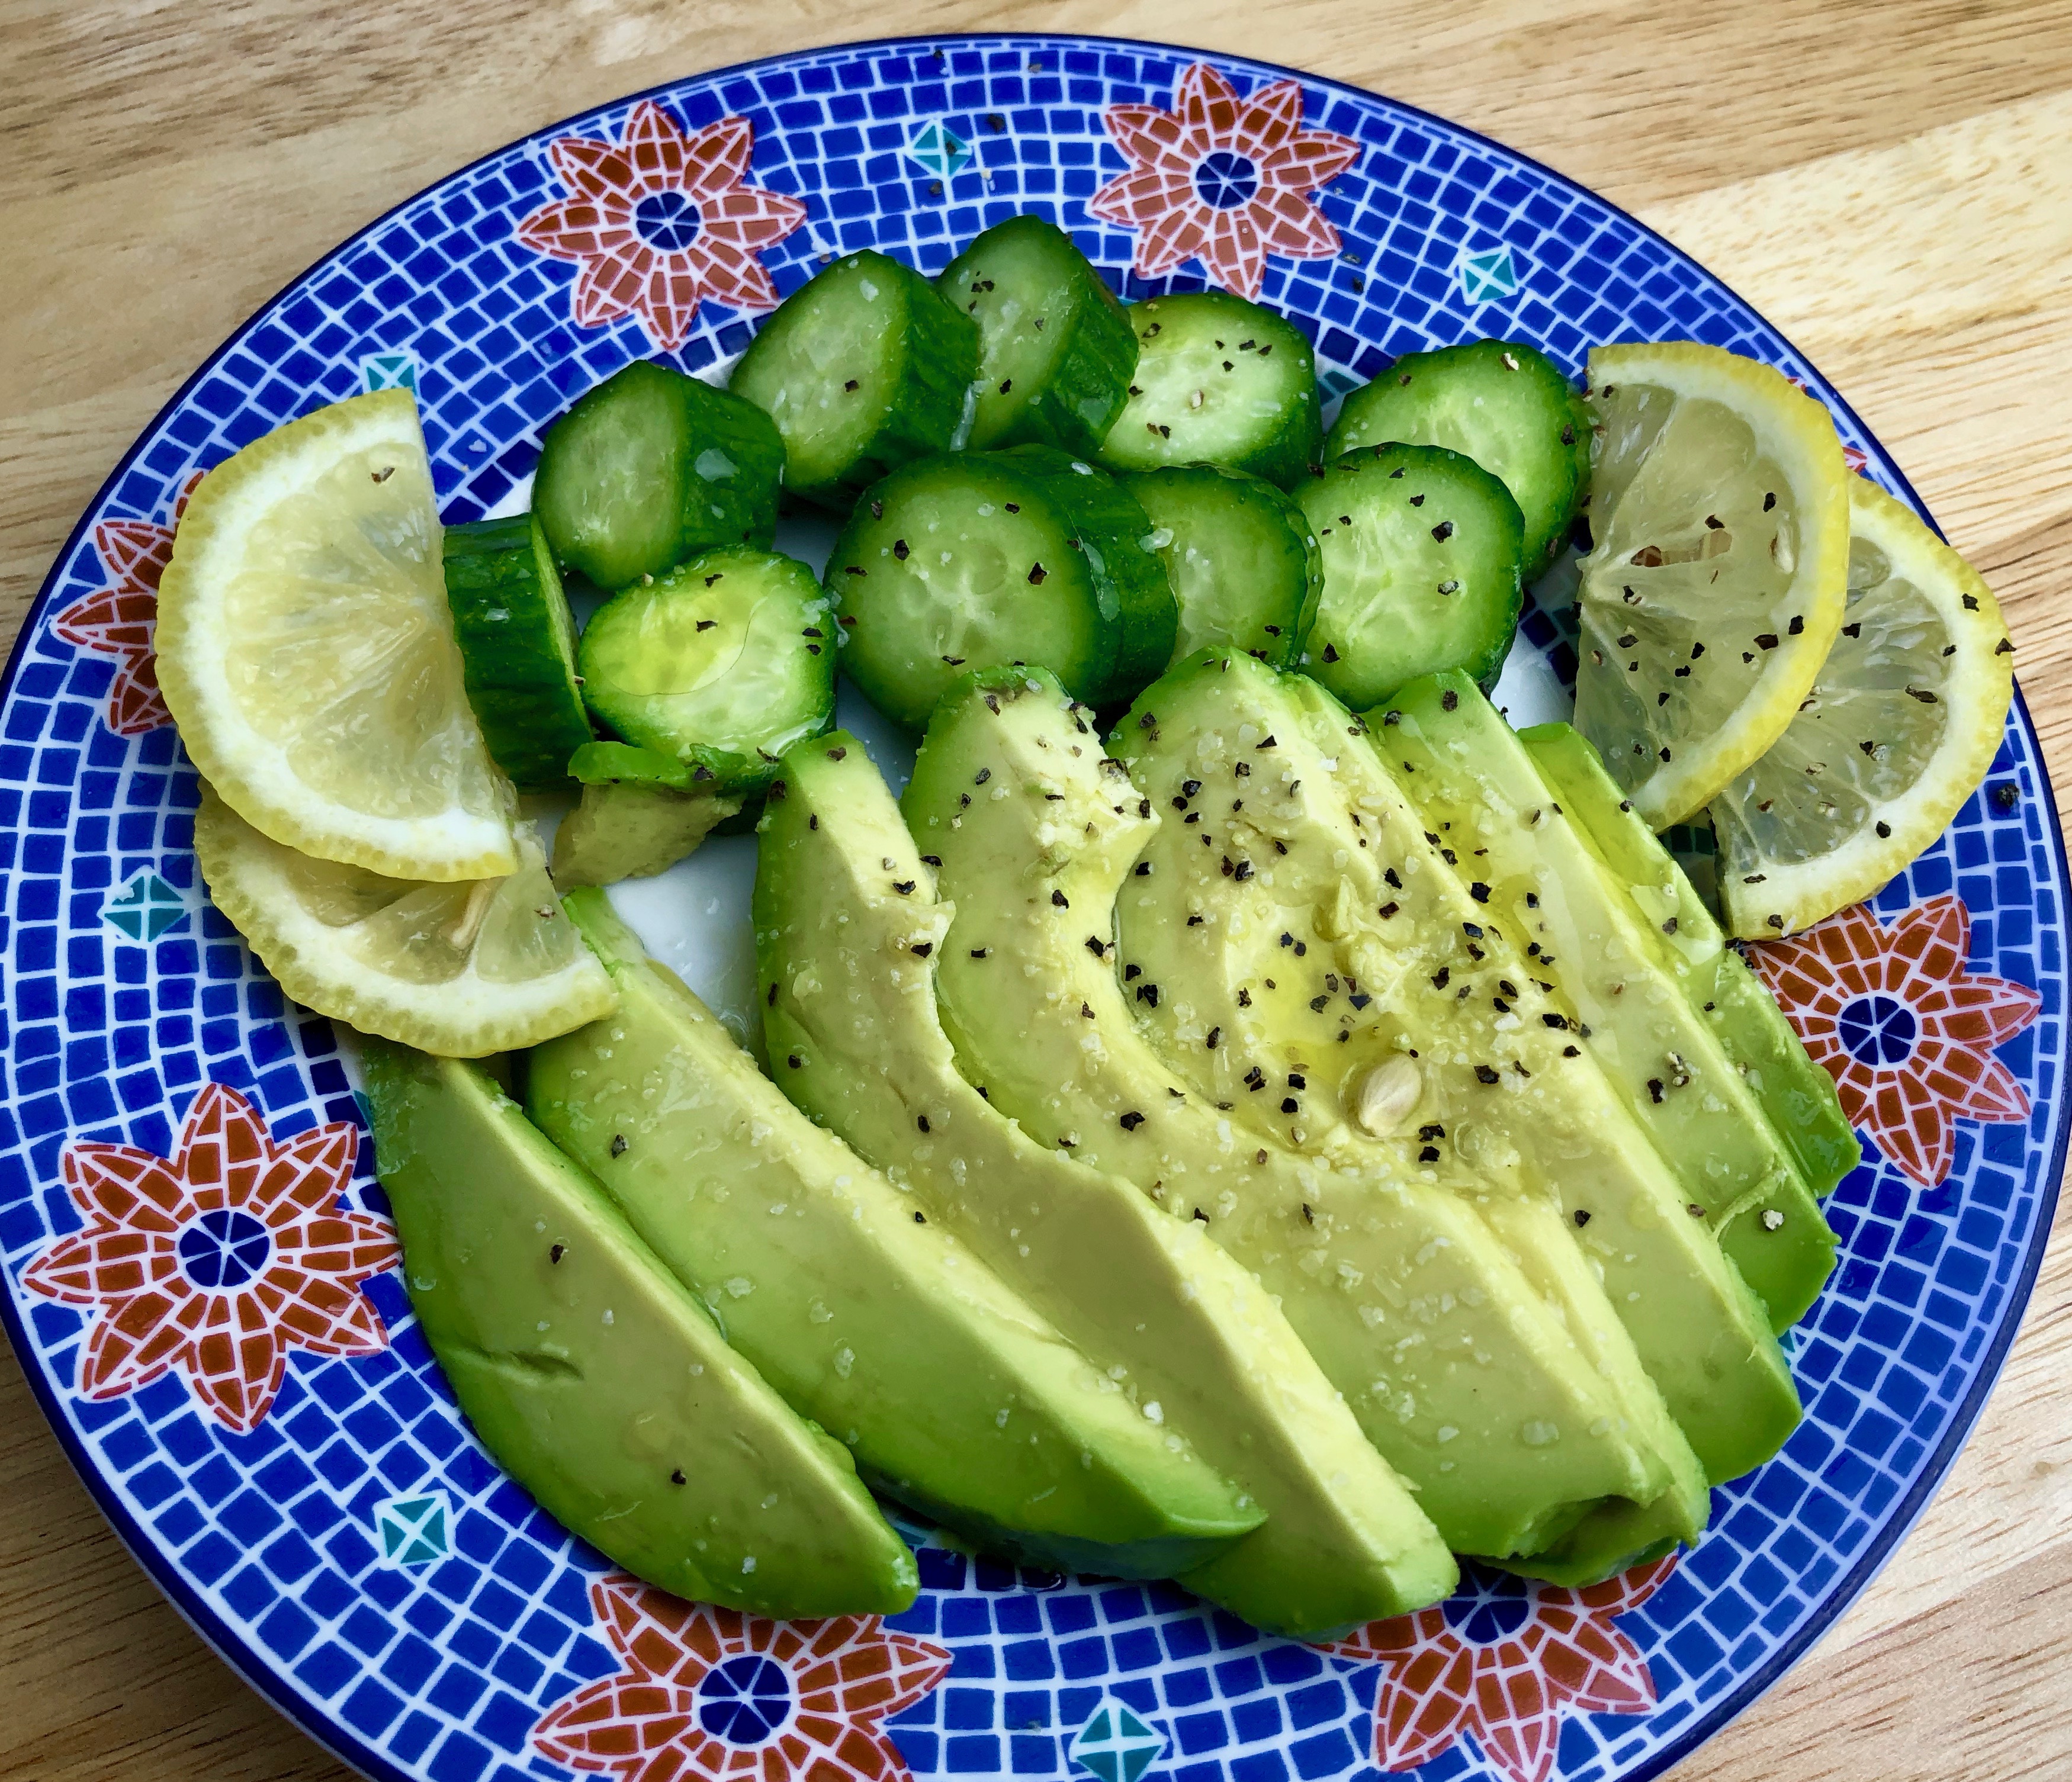 Avocado and Cucumber Plate